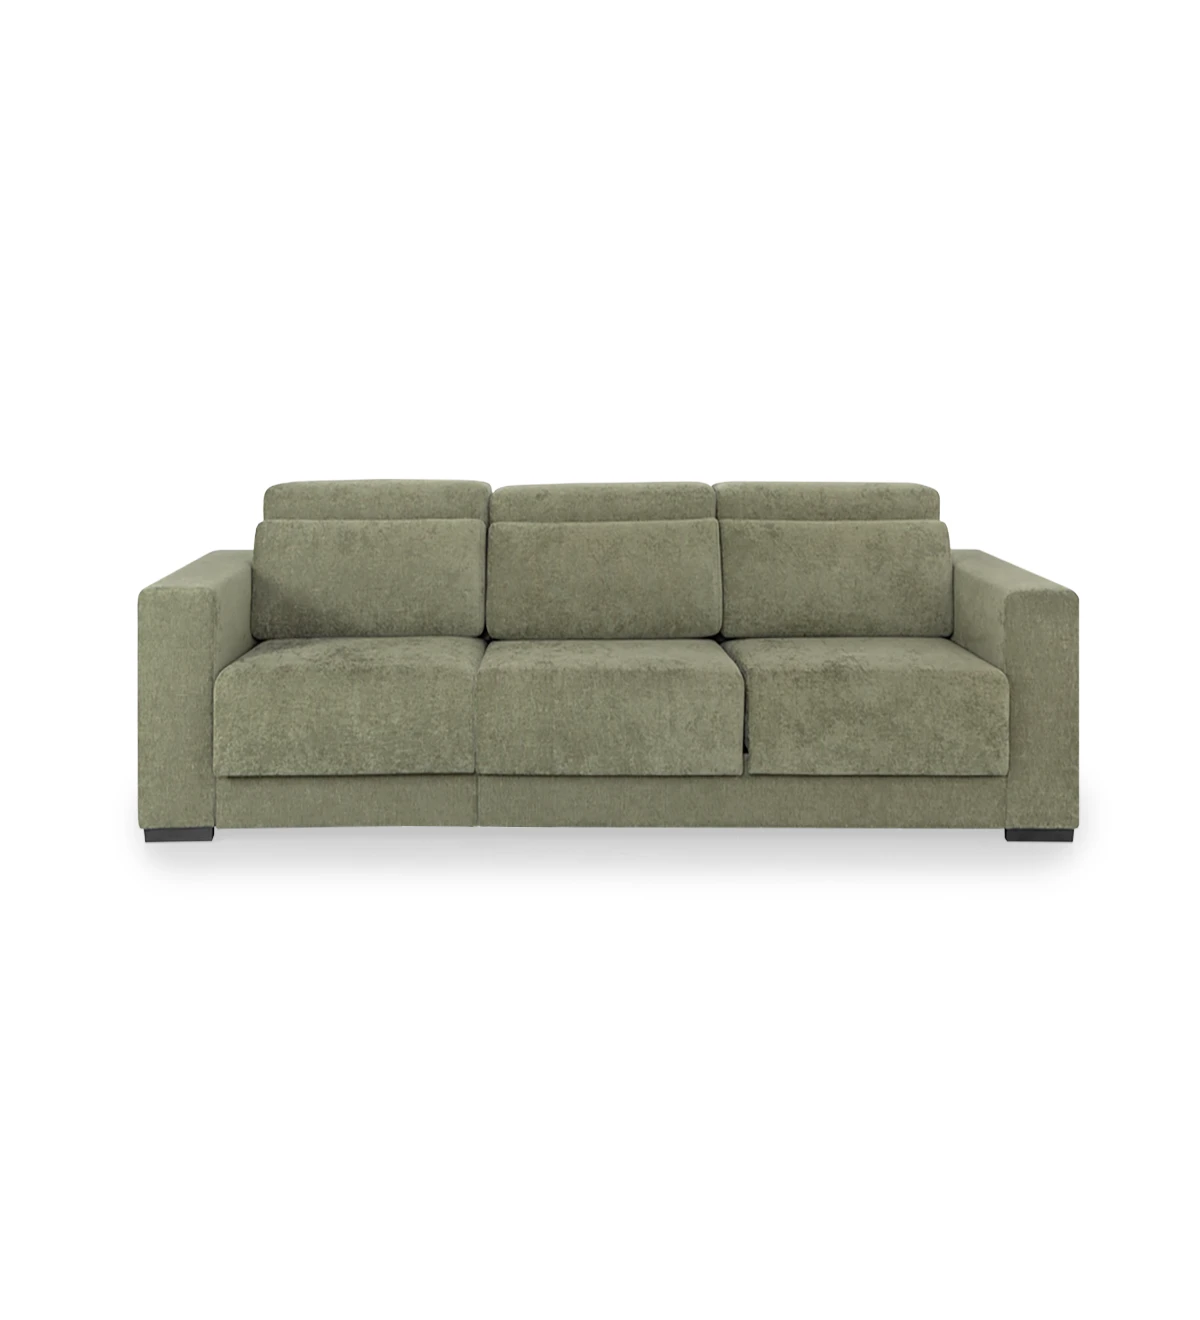 Oporto 3-seater sofa upholstered in green fabric, reclining headrests and sliding seats, 250 cm.